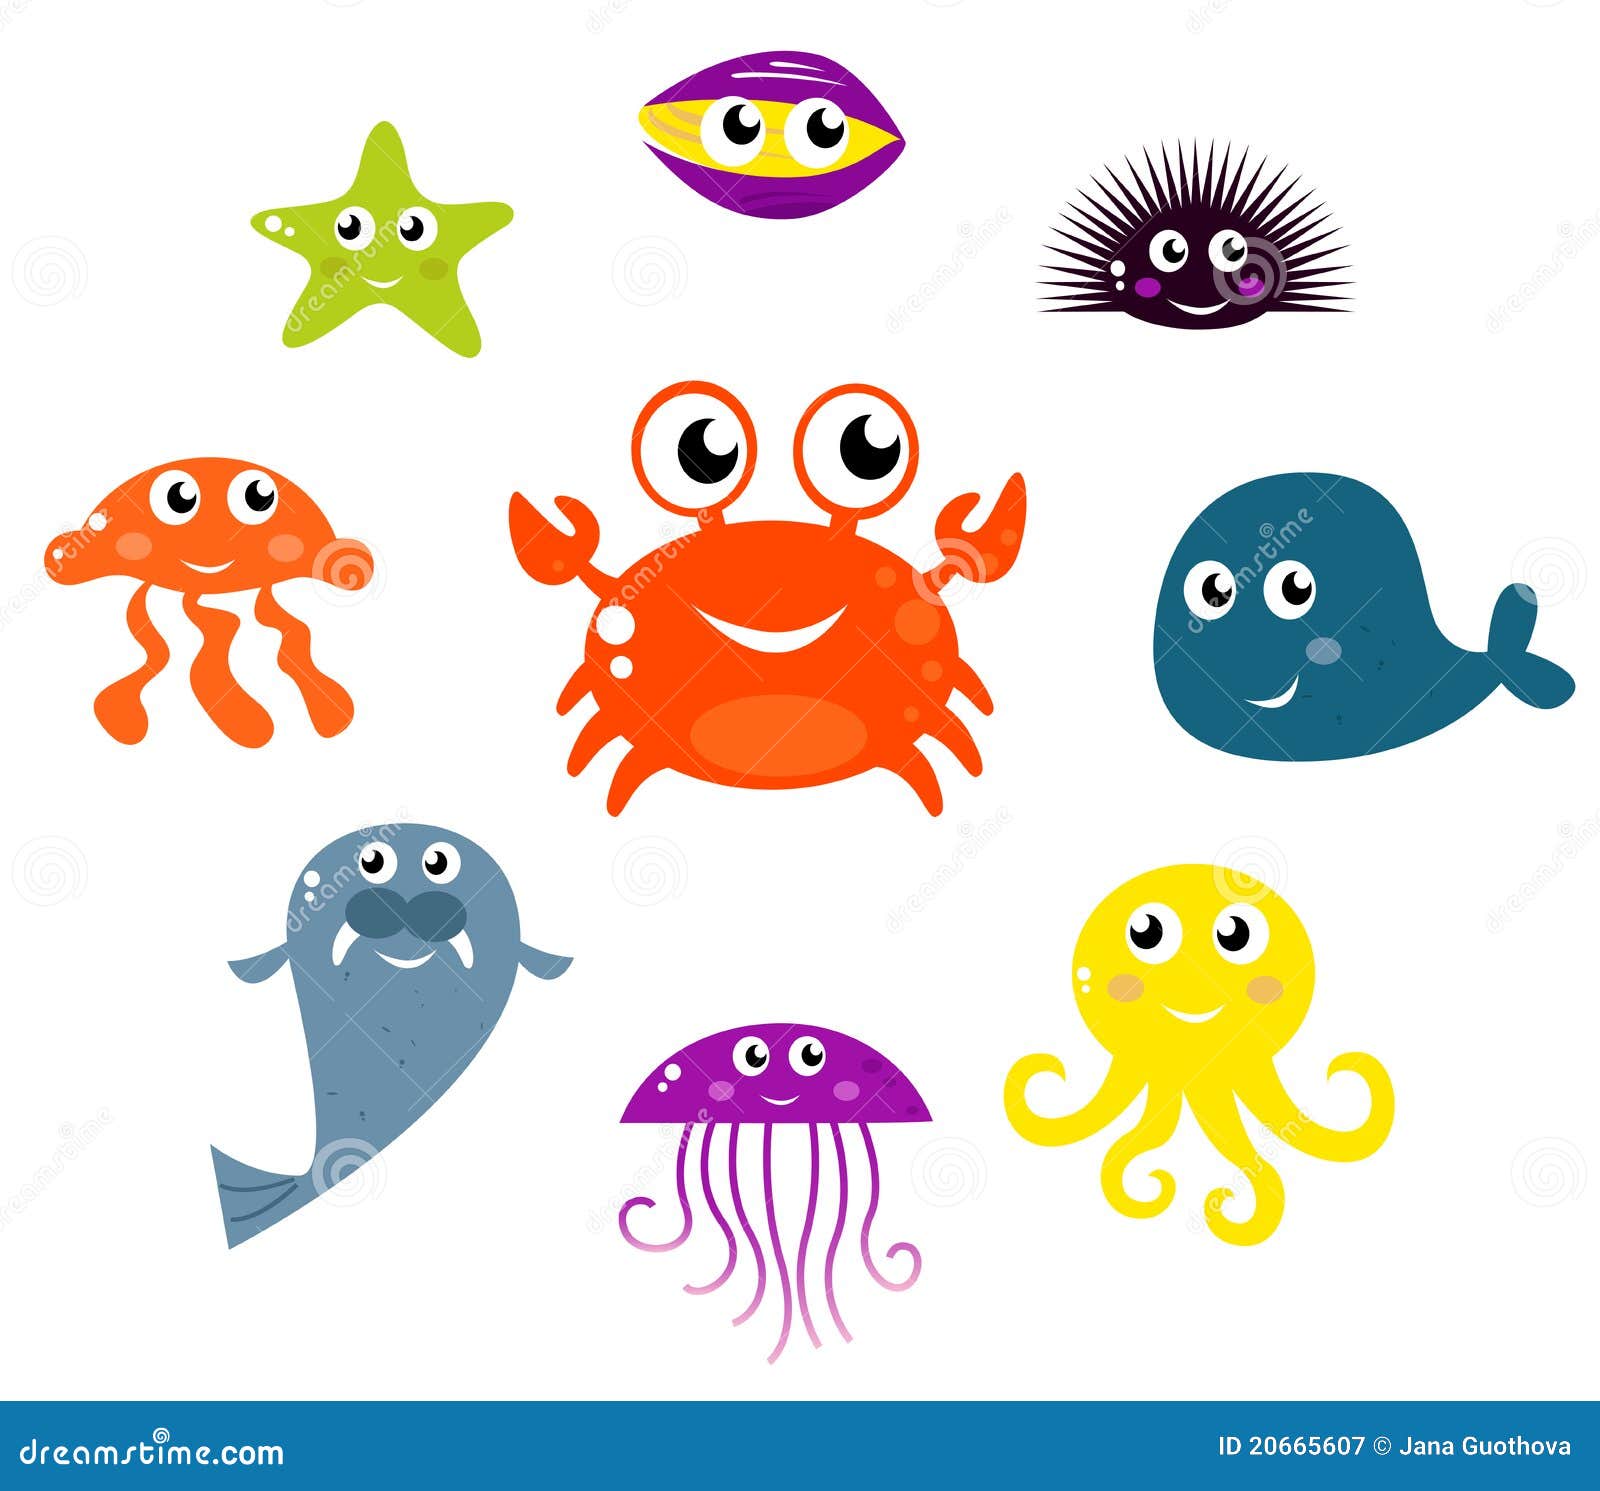 sea creatures and animals icons.